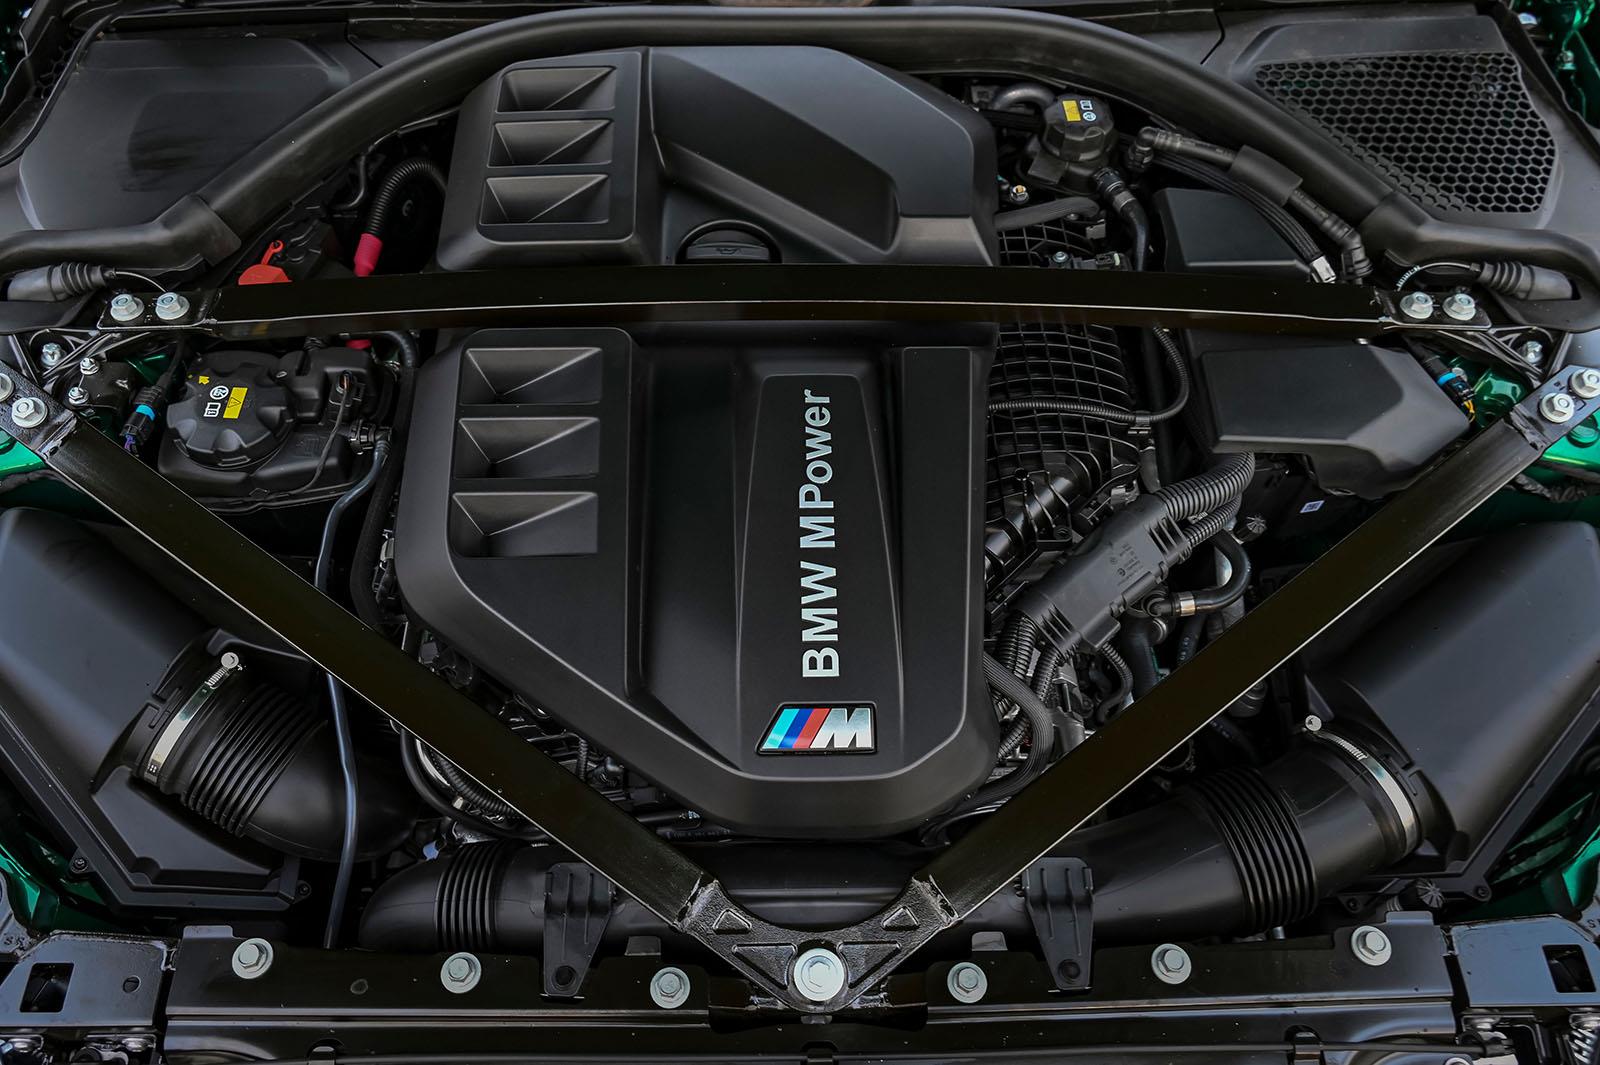 what is the bmw m3 top speed?